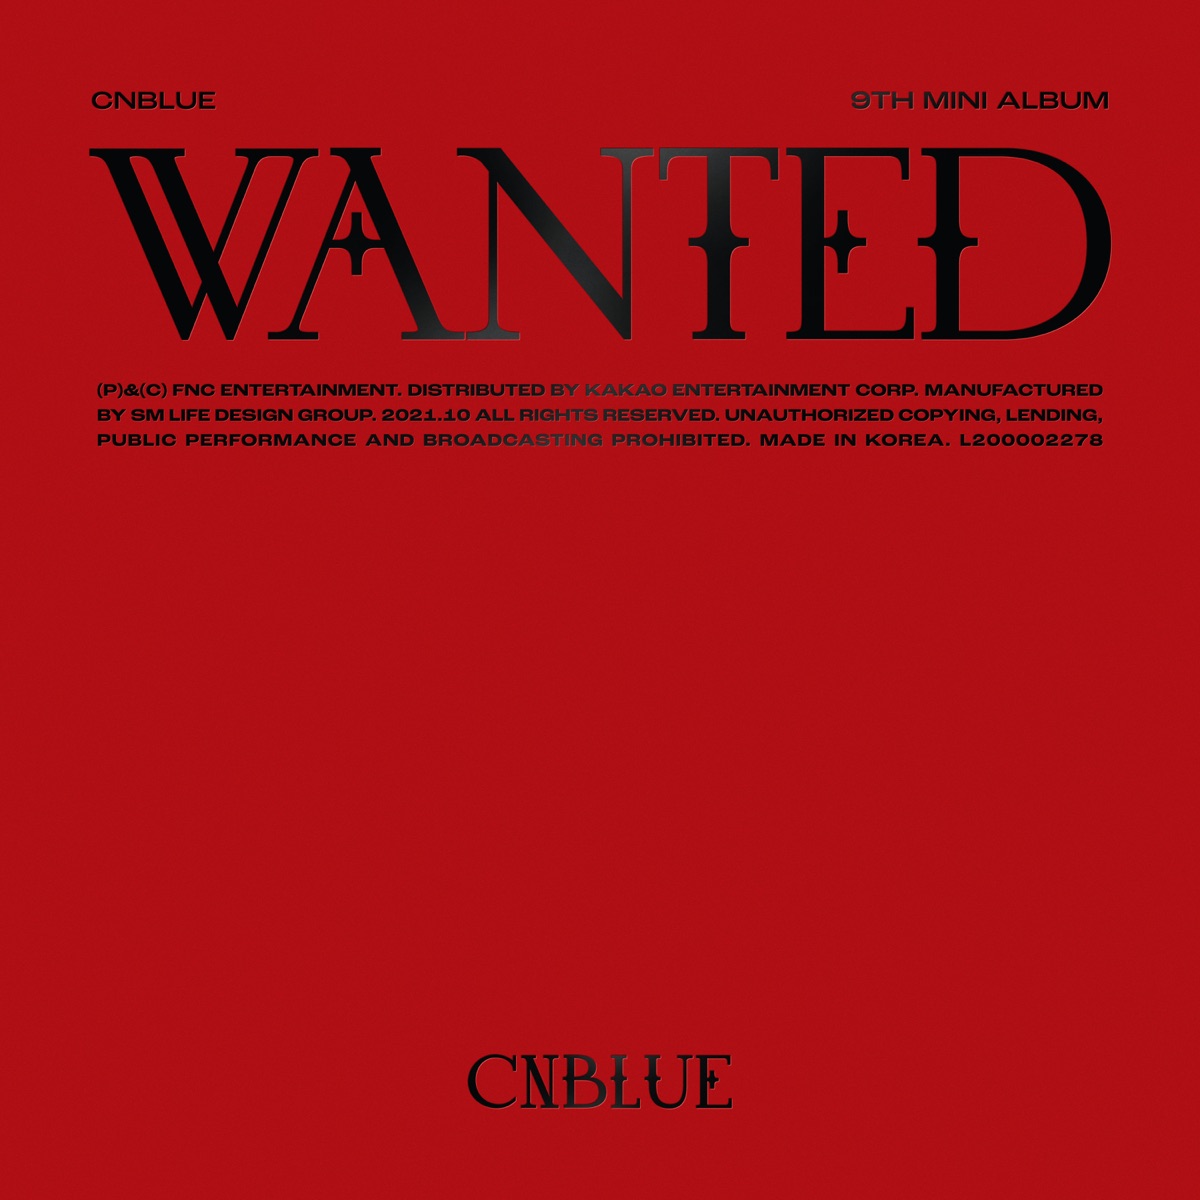 Cover for『CNBLUE - Nothing』from the release『WANTED』